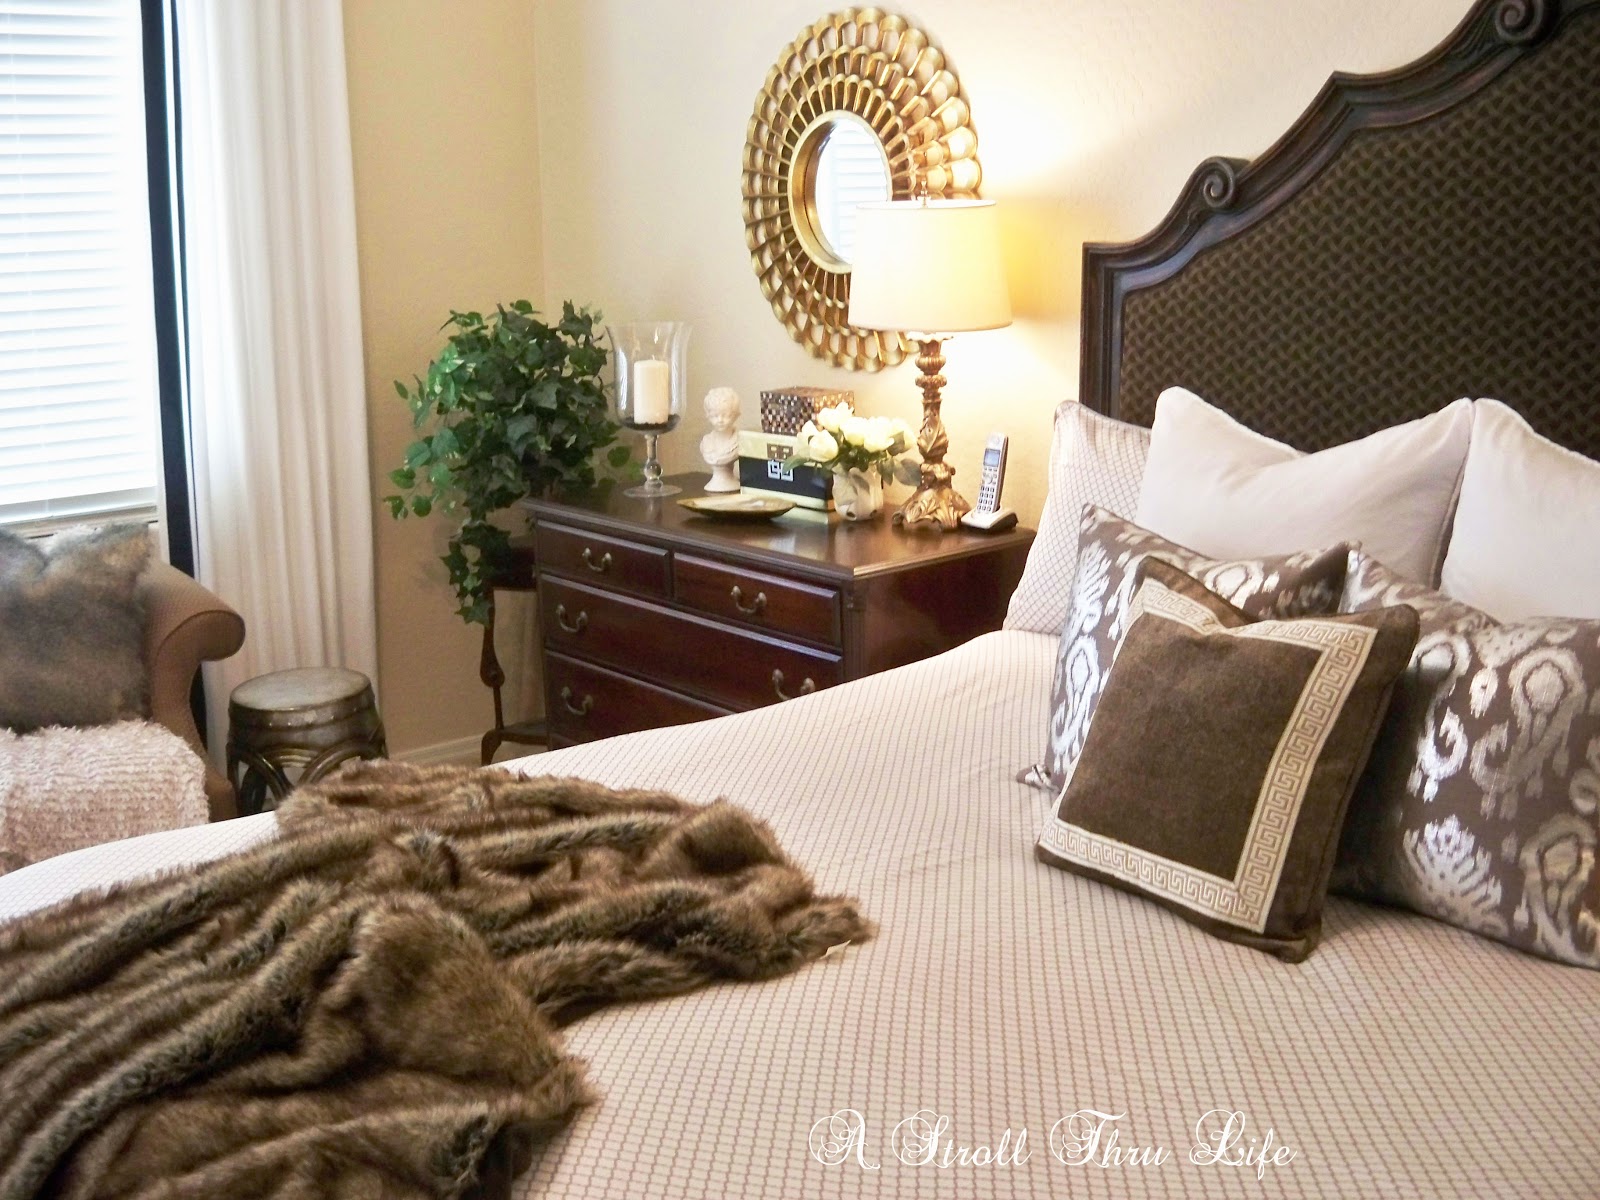 A Stroll Thru Life: New Bedding For The Master Bedroom